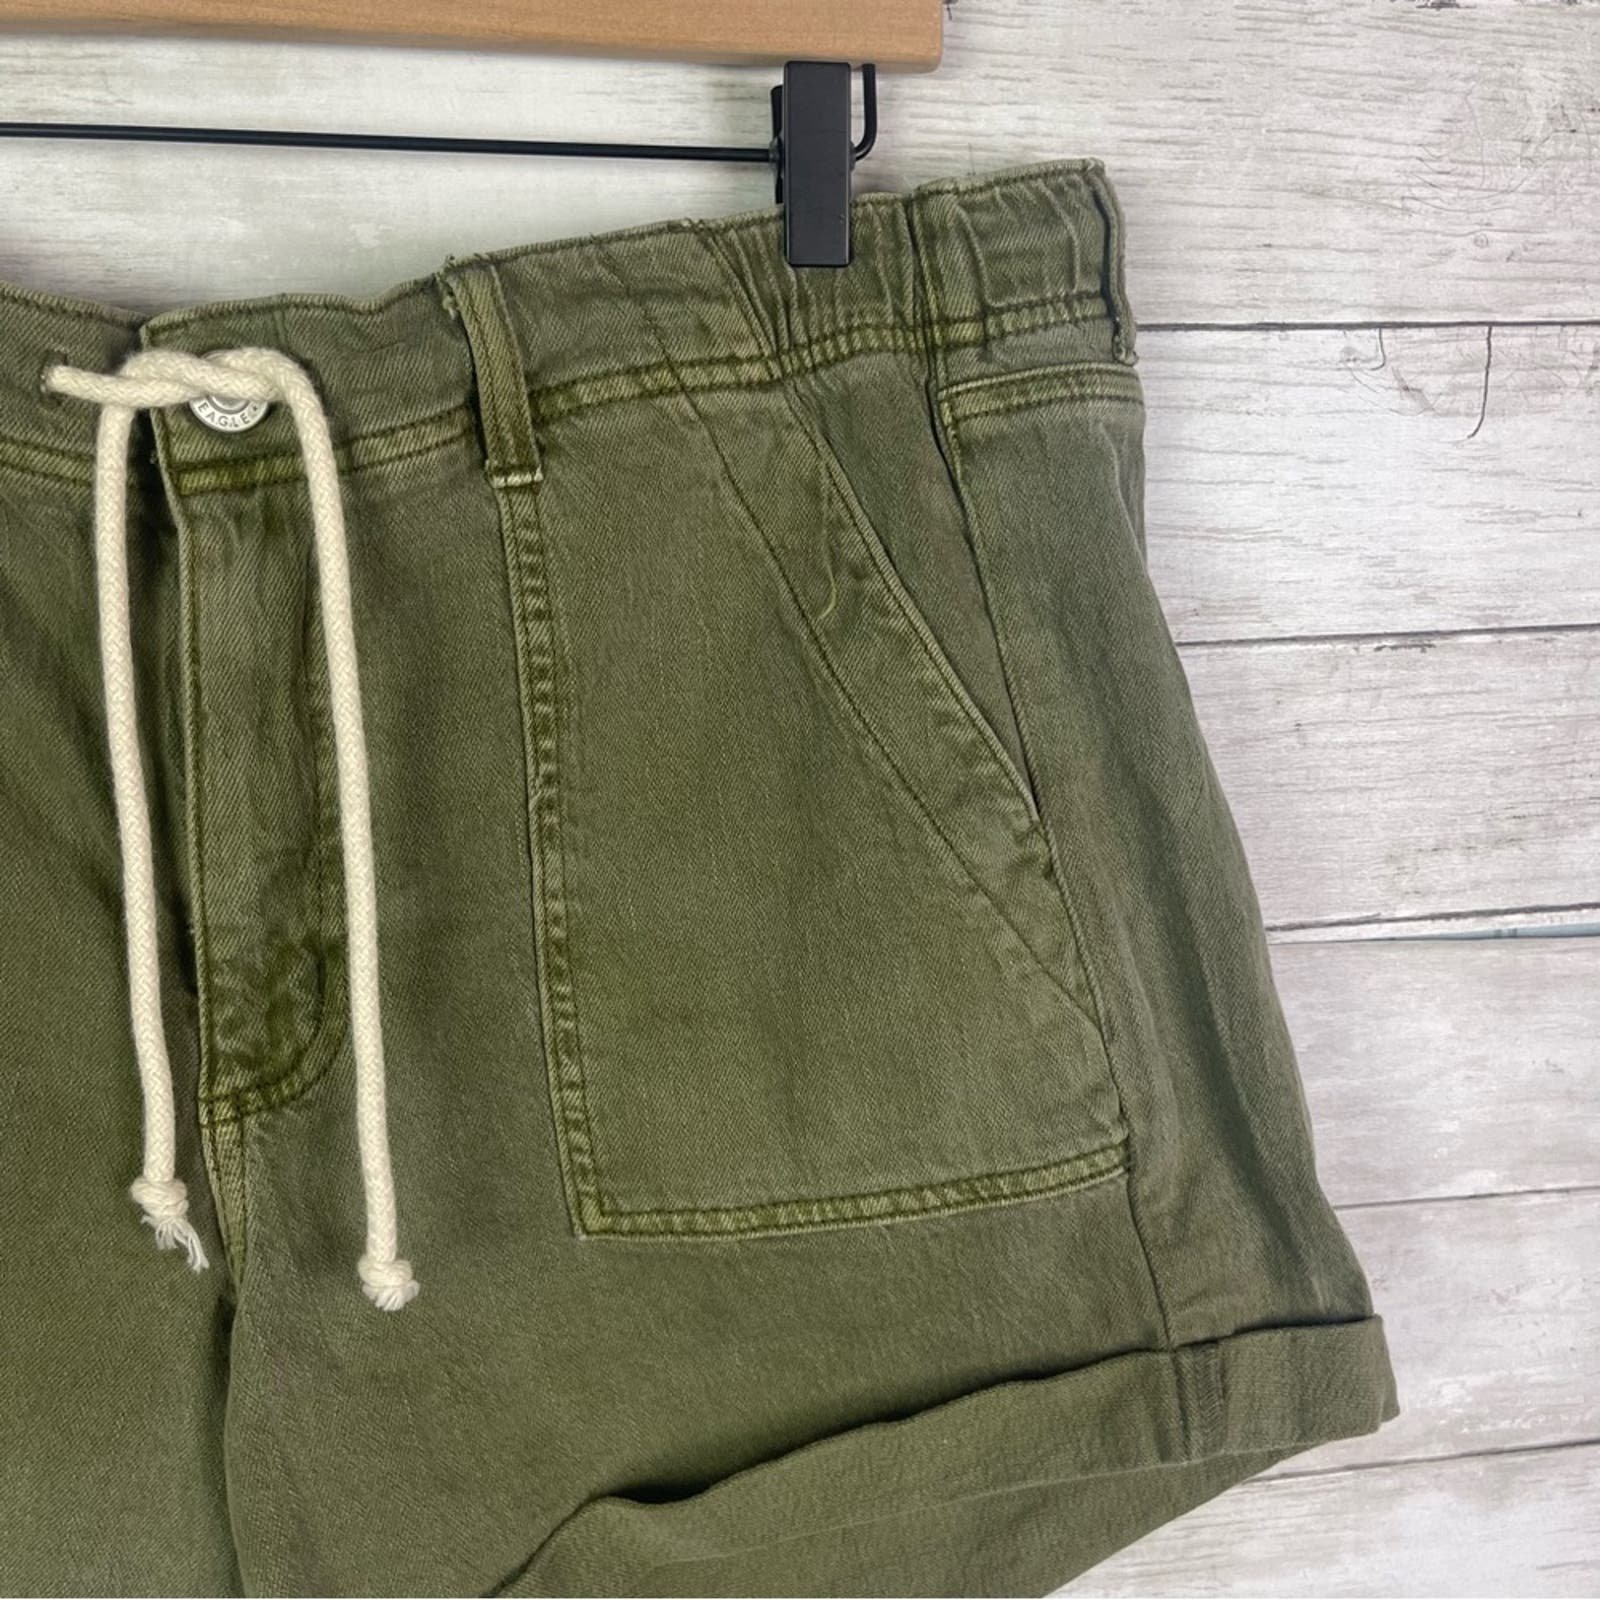 Latest  American Eagle Tomgirl Short Green FNMf4bHYN Outlet Store